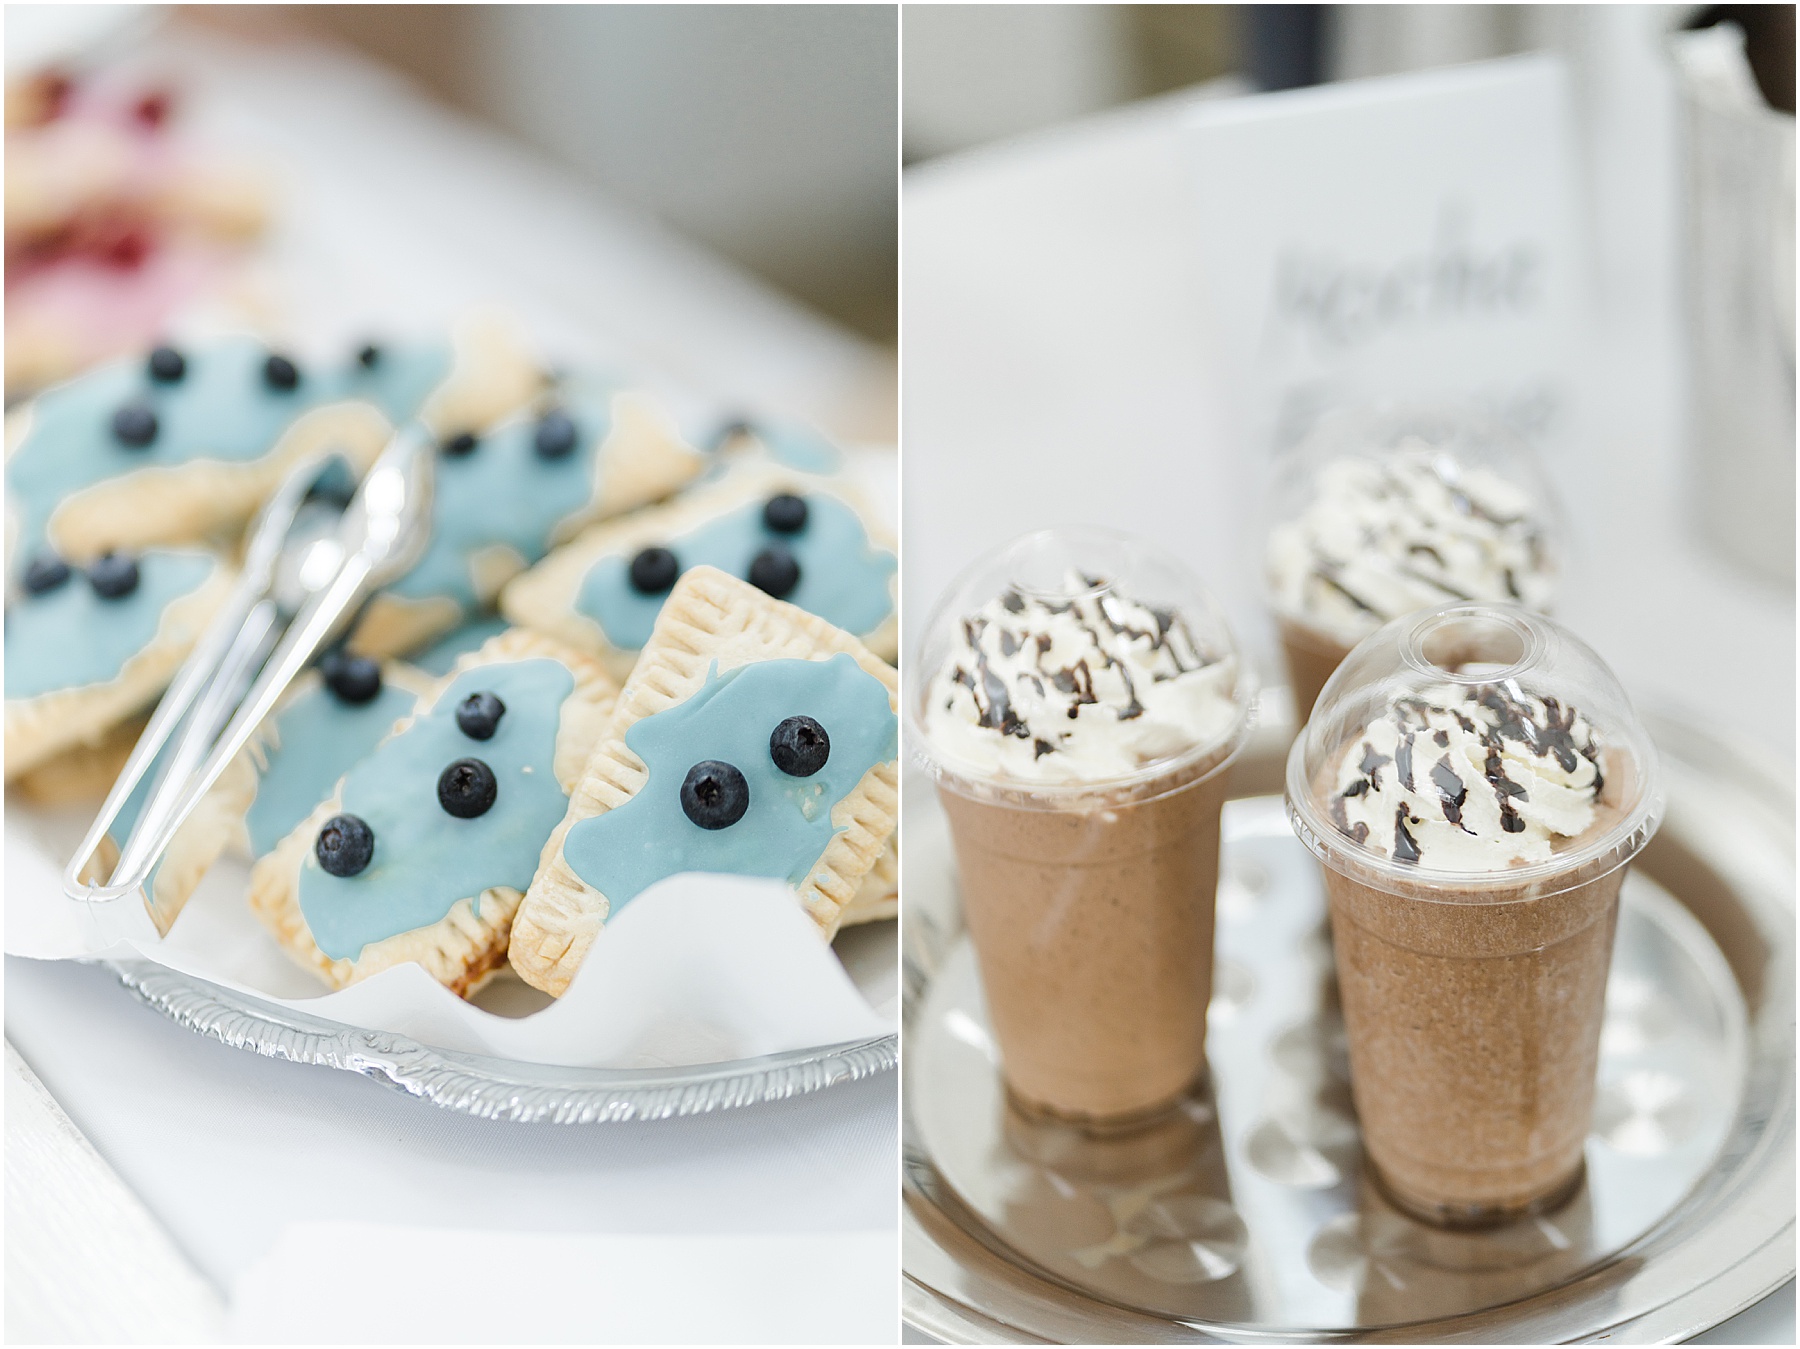 Homemade Pop Tart and Mocha at Photography Wedding Conference